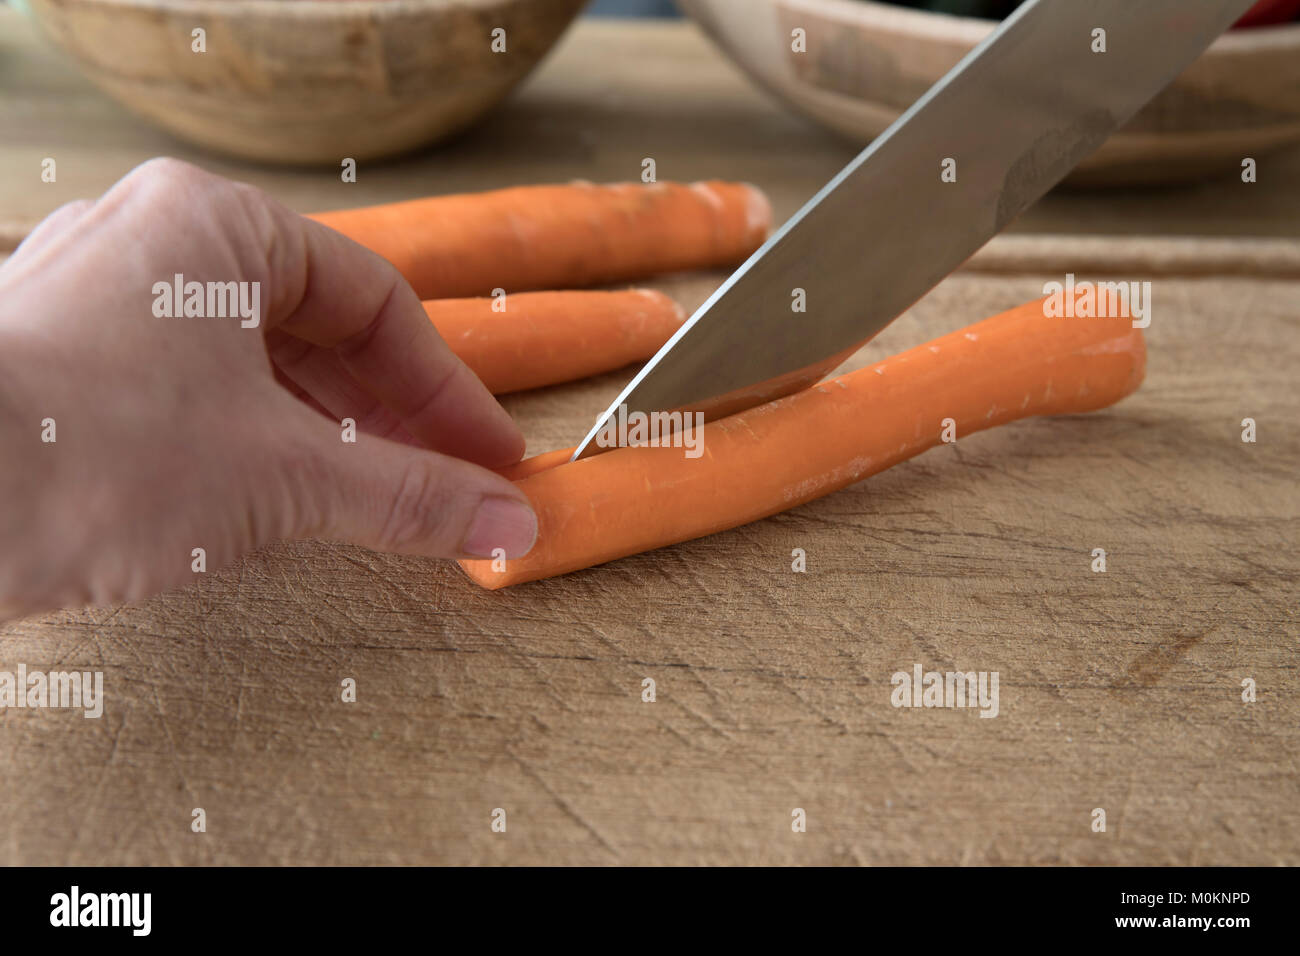 Knife skills cutting slicing carrot in half safely cutting away from fingers stabilizing food. Stock Photo